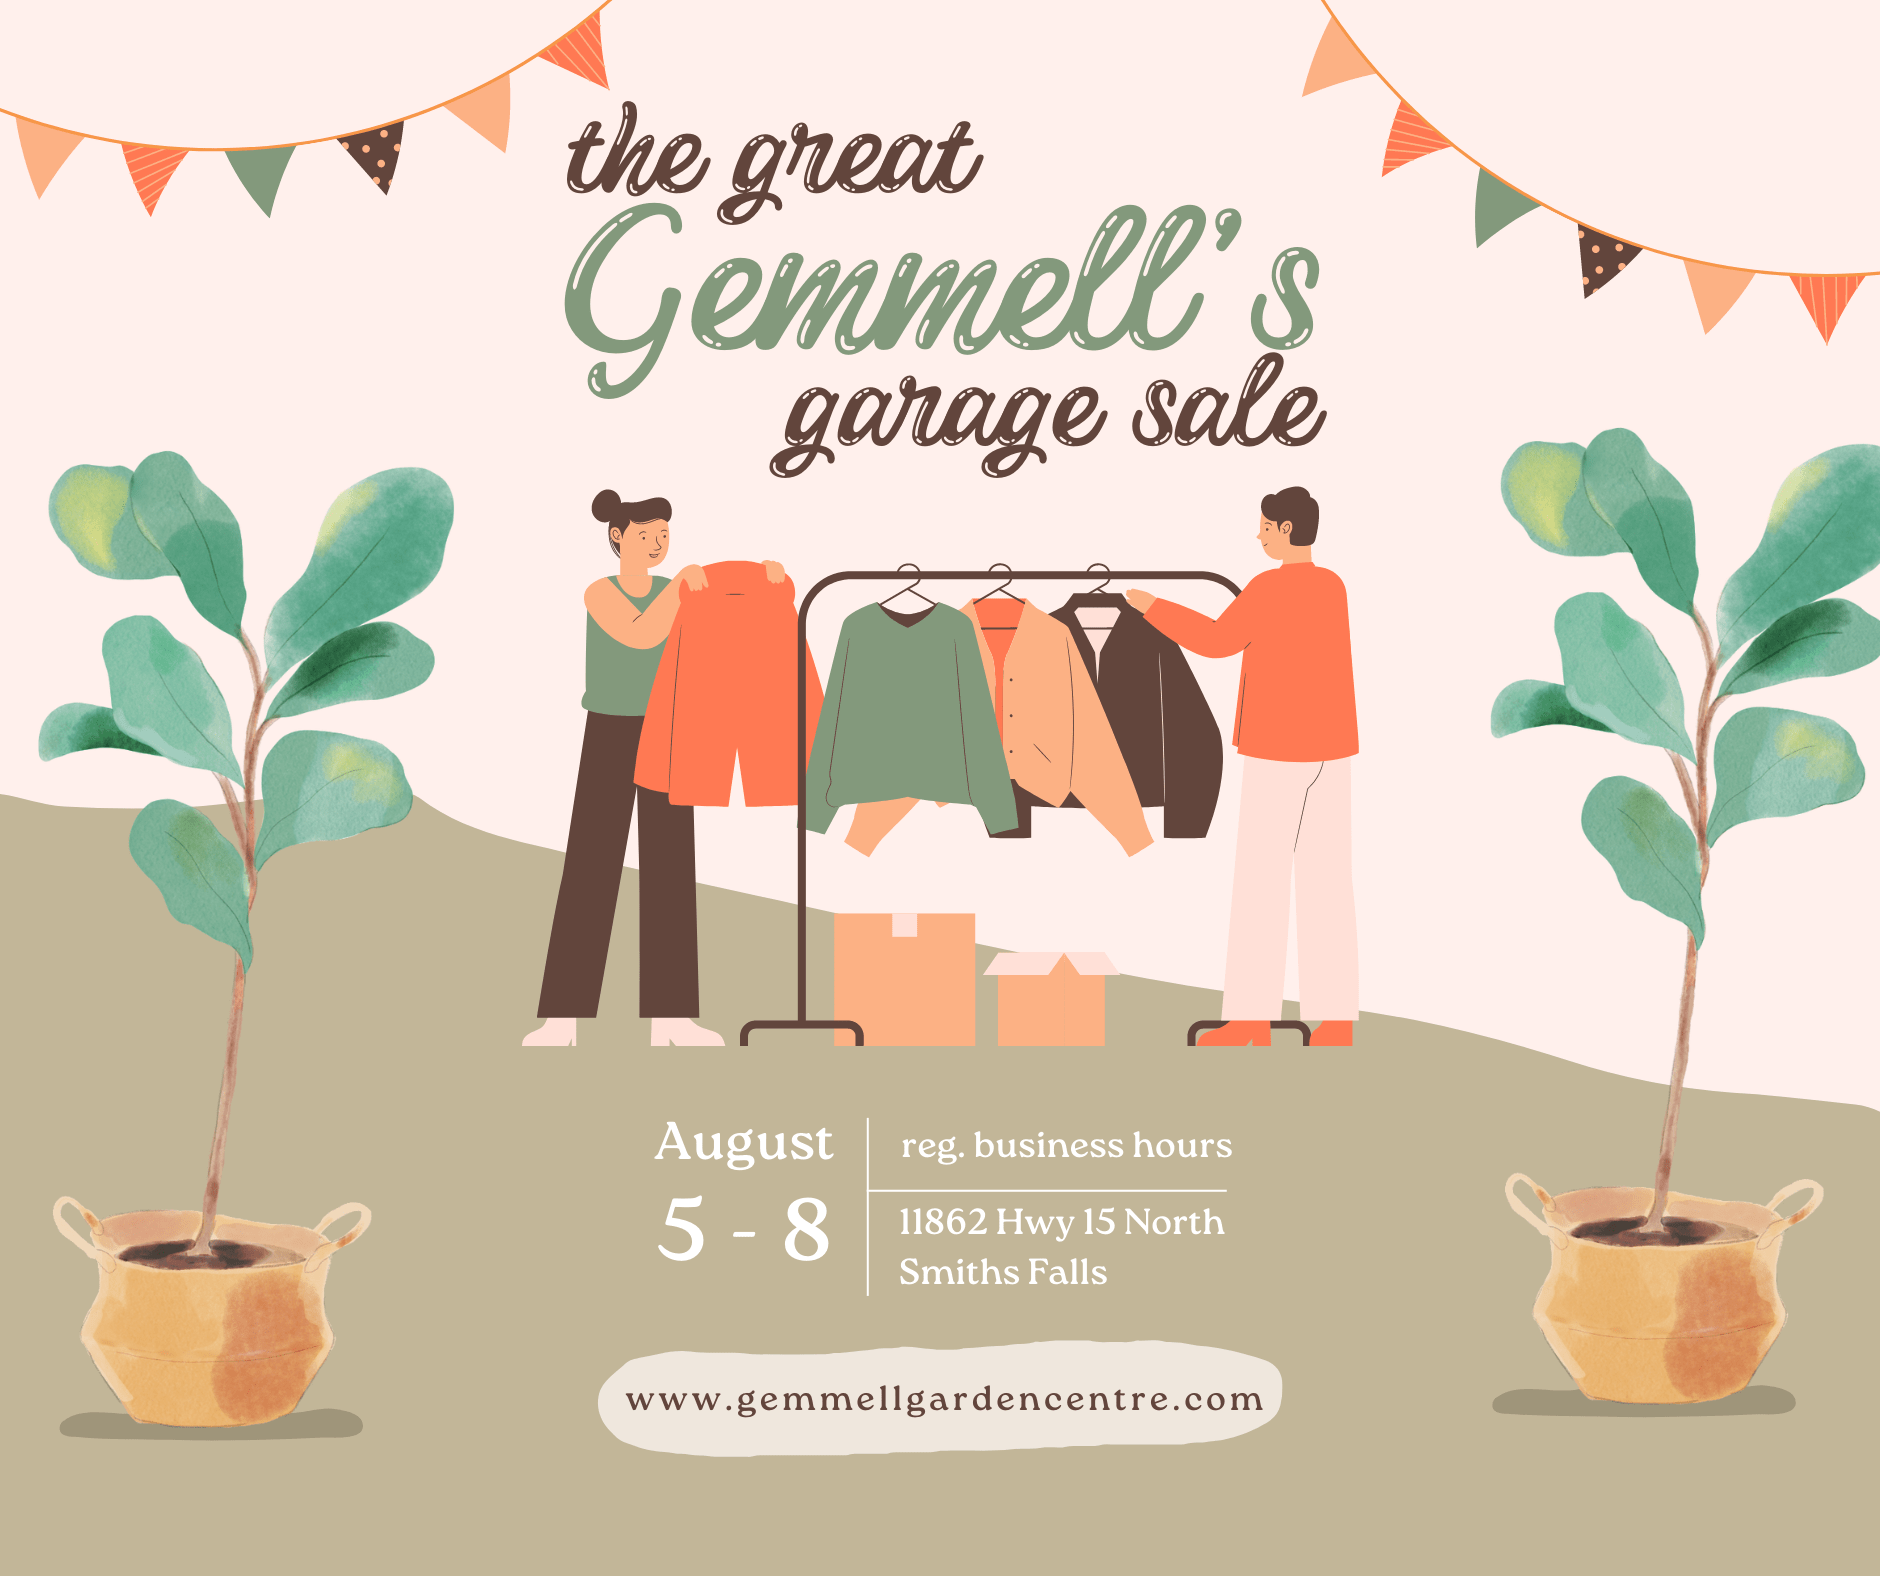 The Great Gemmell's Garage Sale Aug 5th to August 8th in Smiths Falls